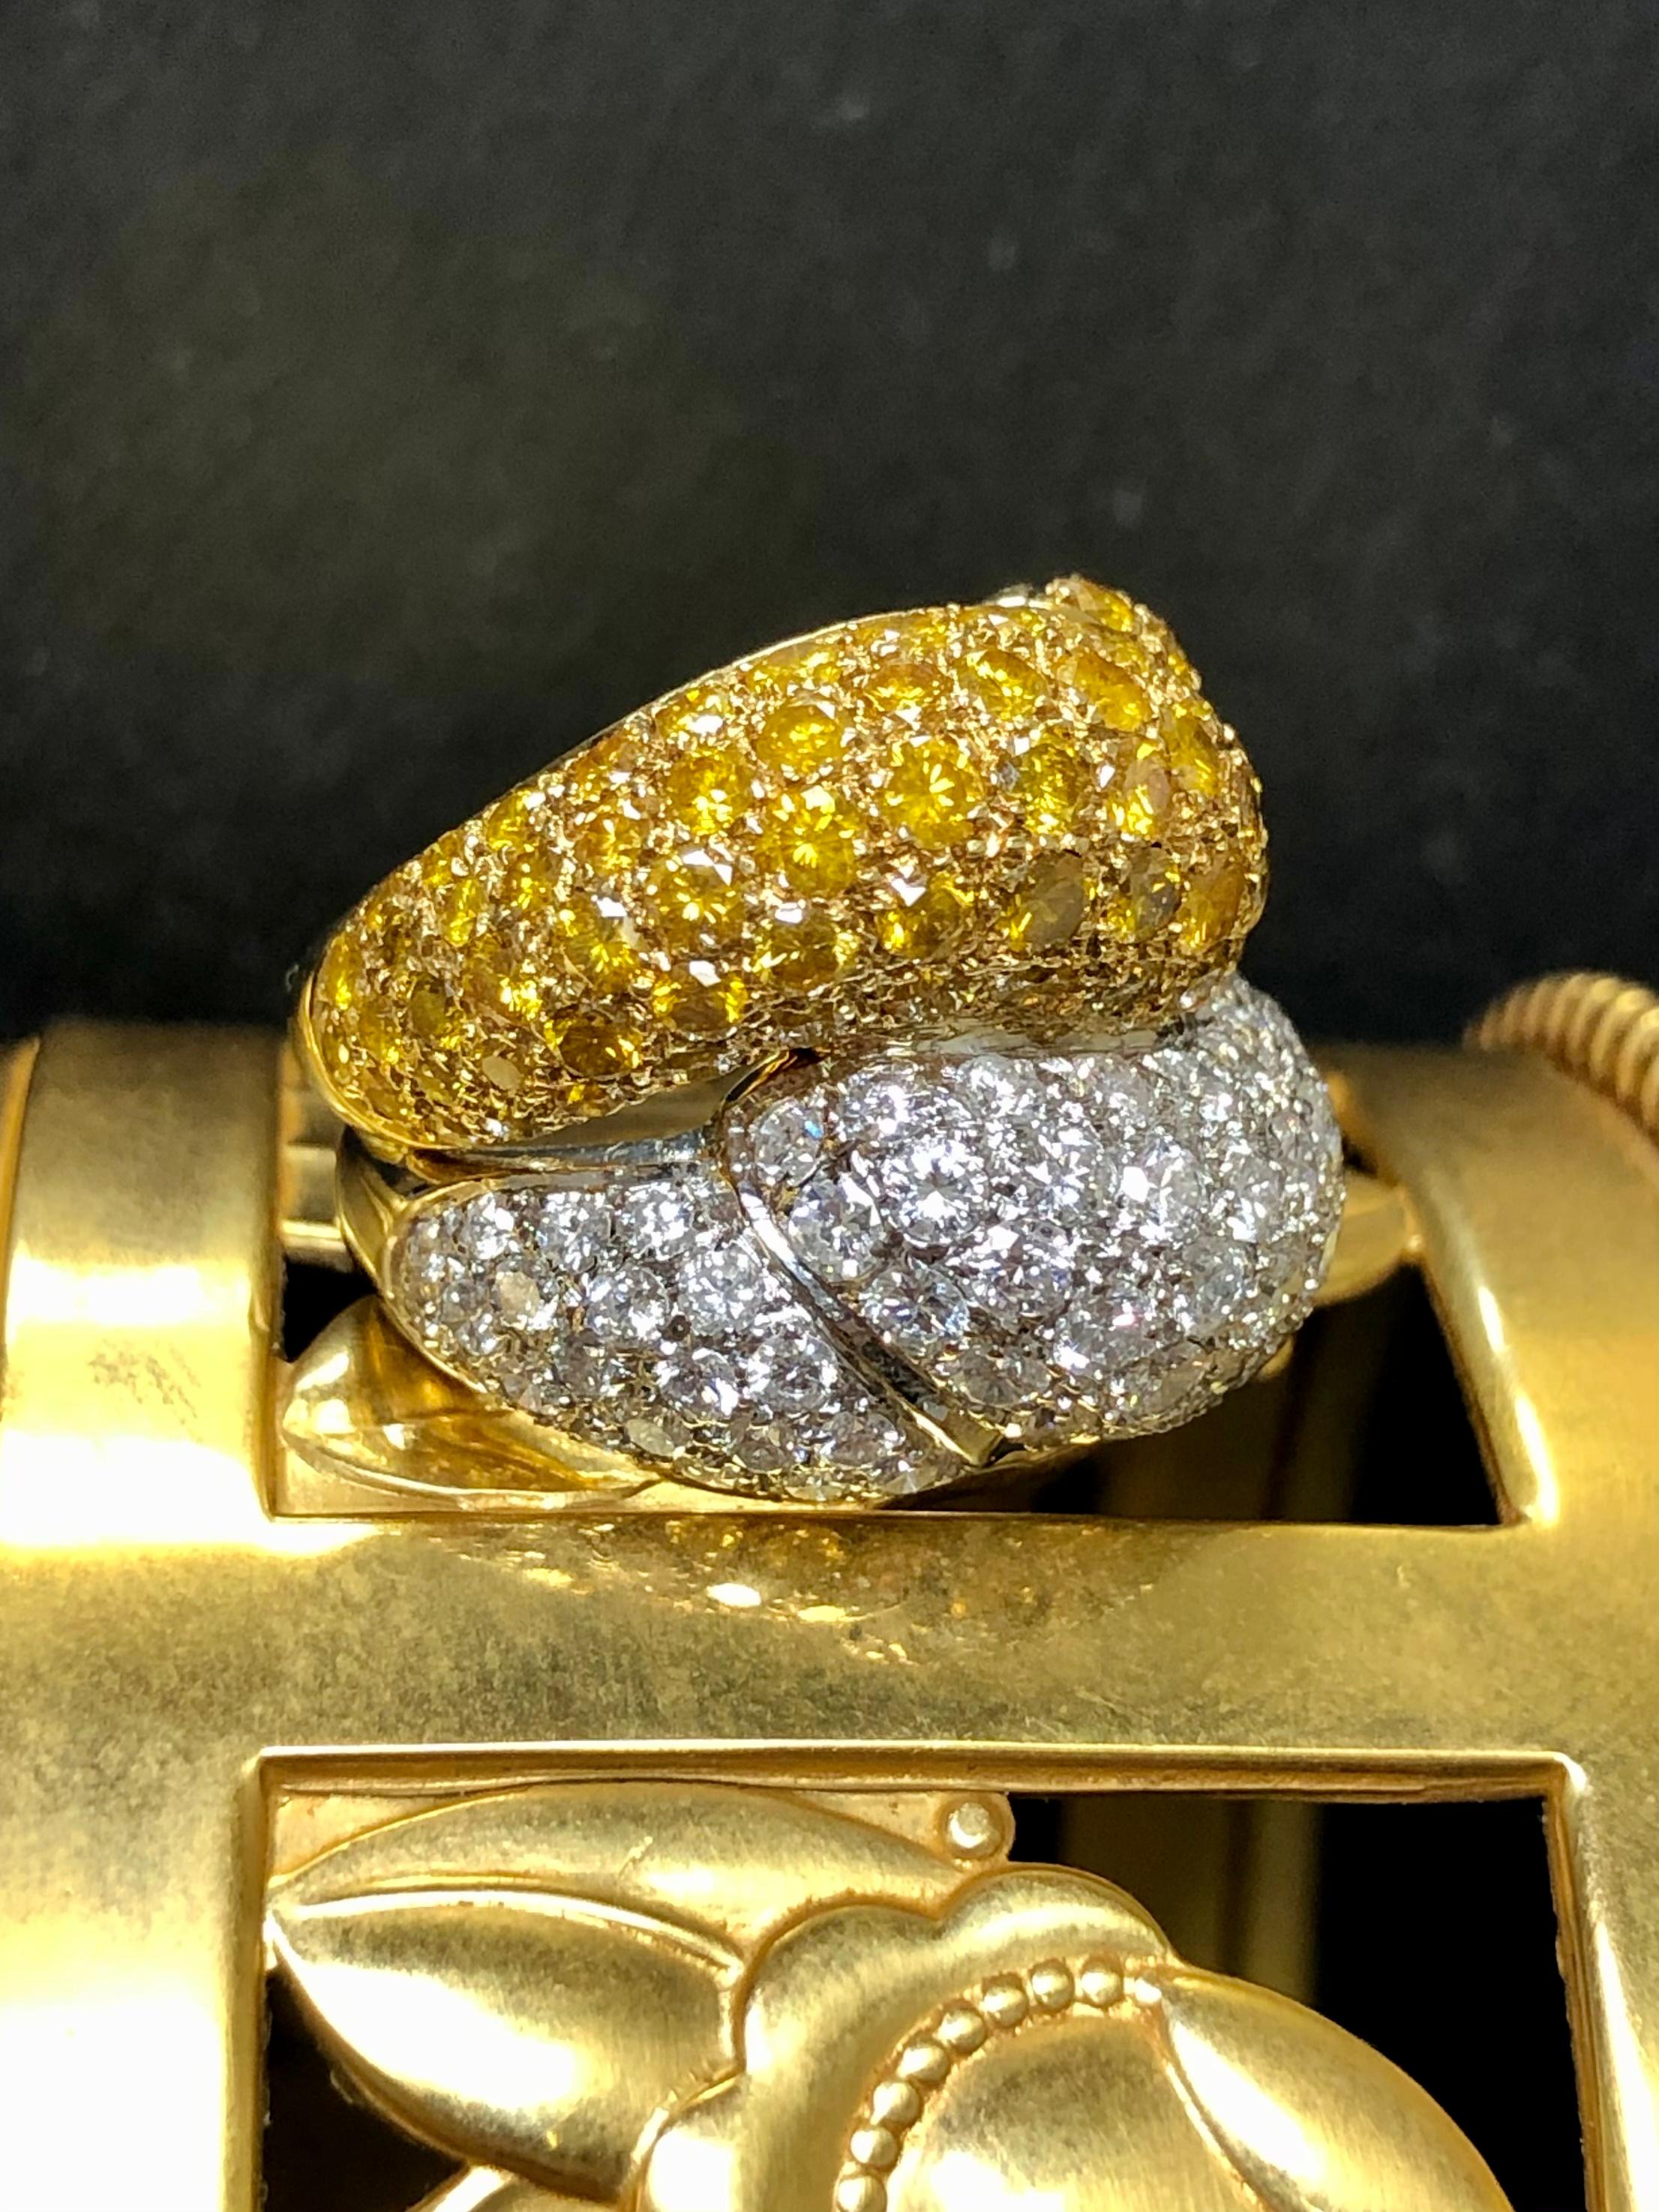 That’s absolutely gorgeous ring screams quality from front to back down to the azuring of the diamonds. It has been hand made in 18K yellow and white gold and set with approximately 3.15cttw in G-H color Vs1-2 clarity white diamonds as well as